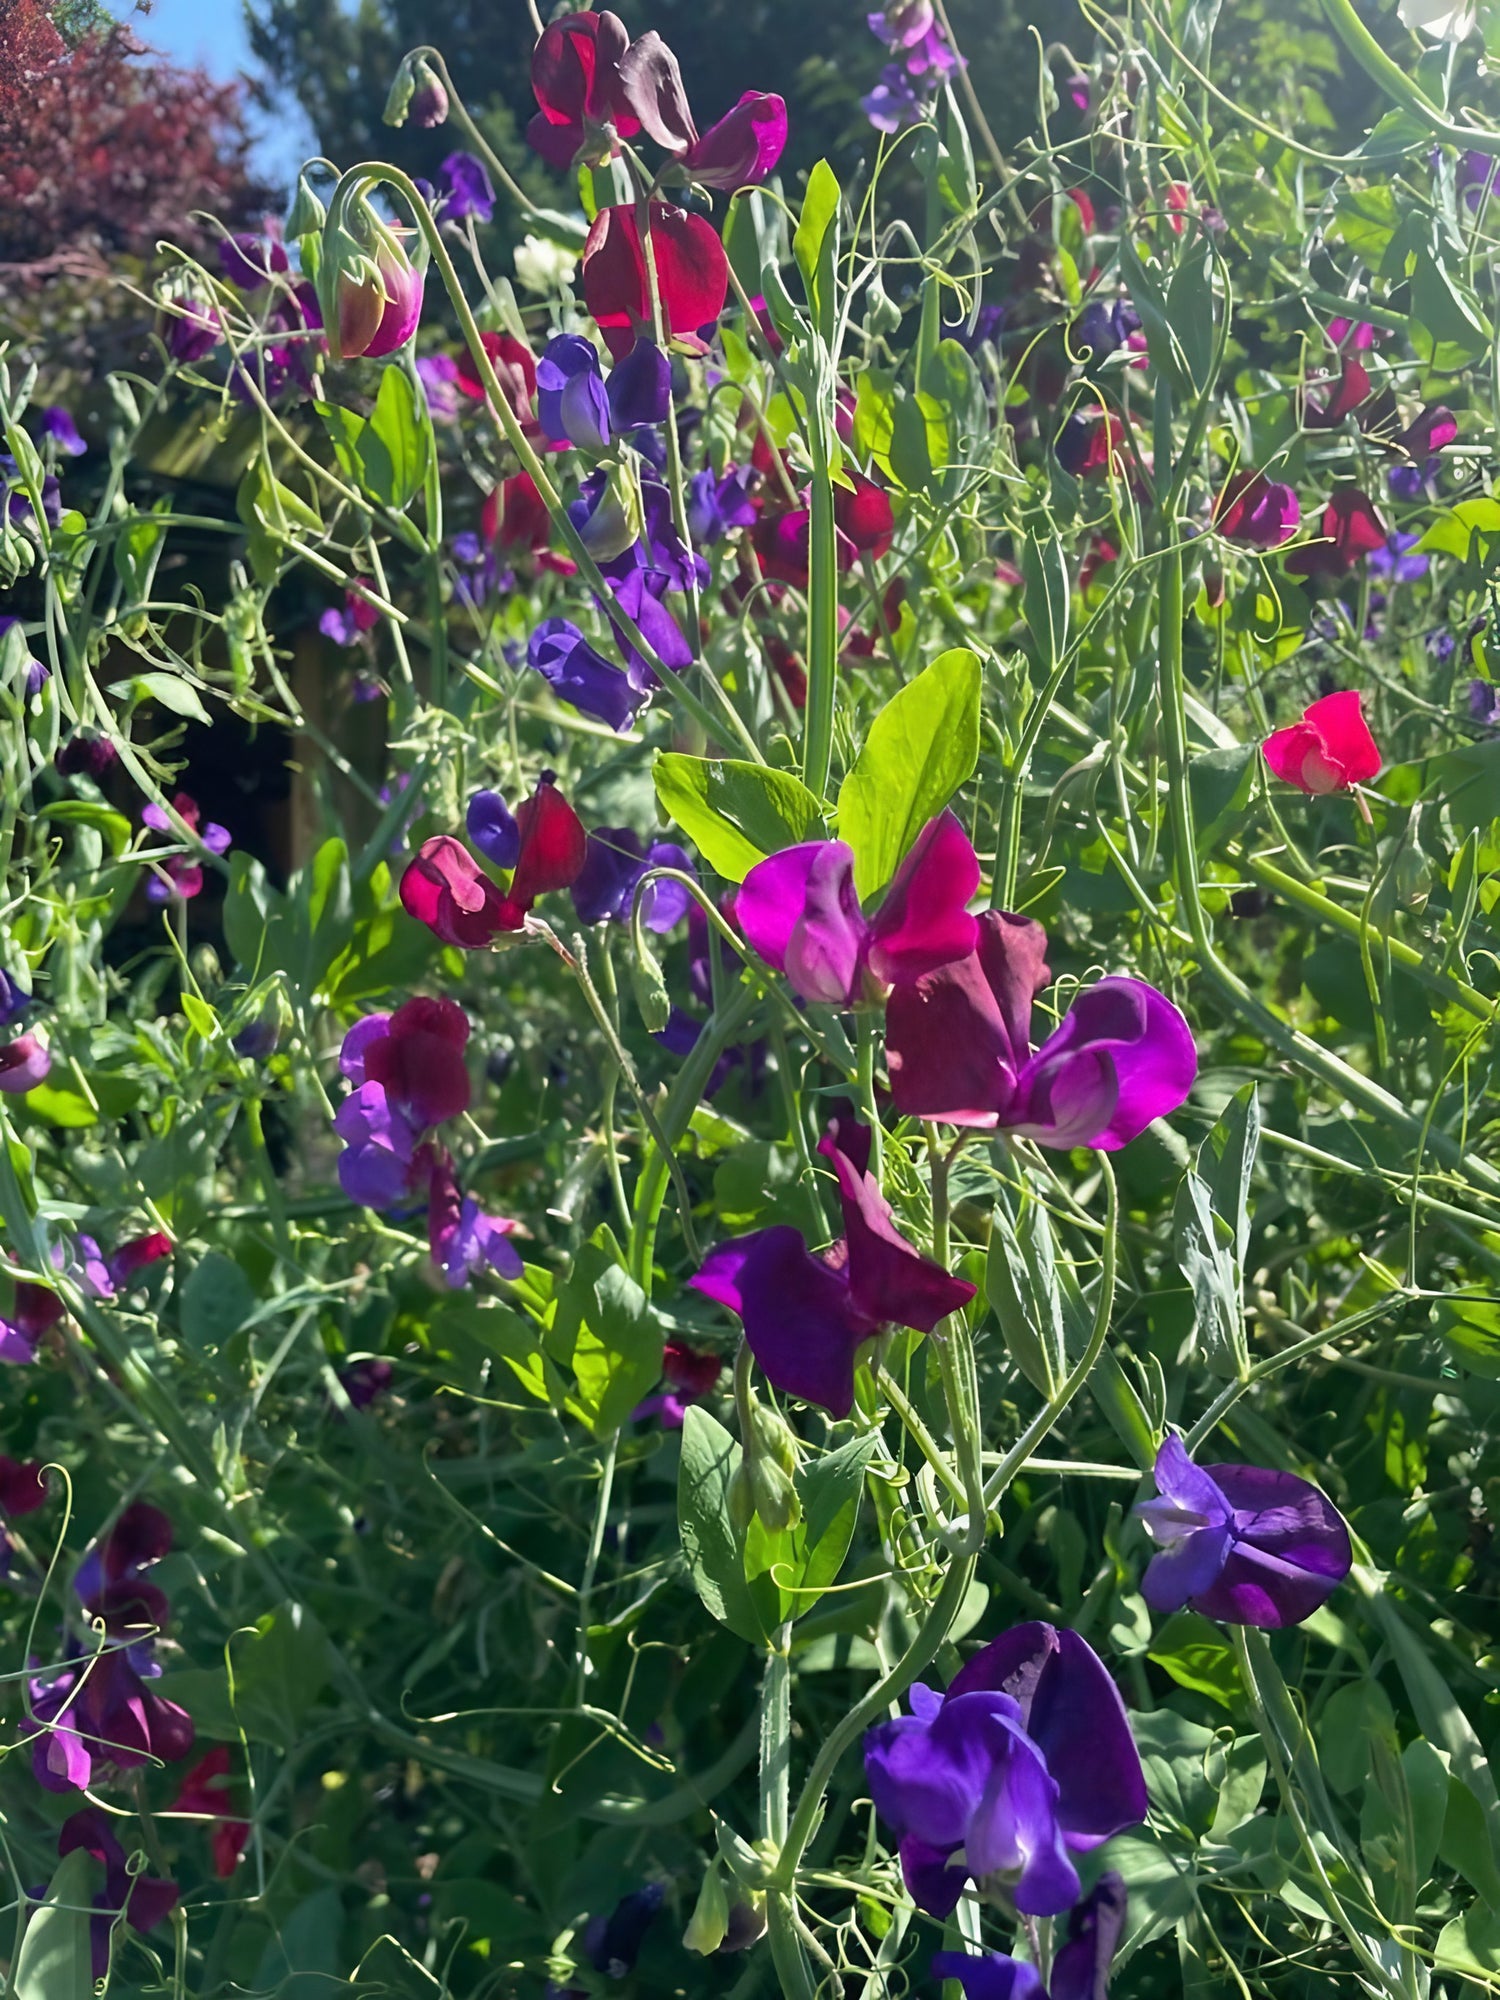 Vibrant Sweet Pea Old Spice Starry Night petals and greenery in daylight